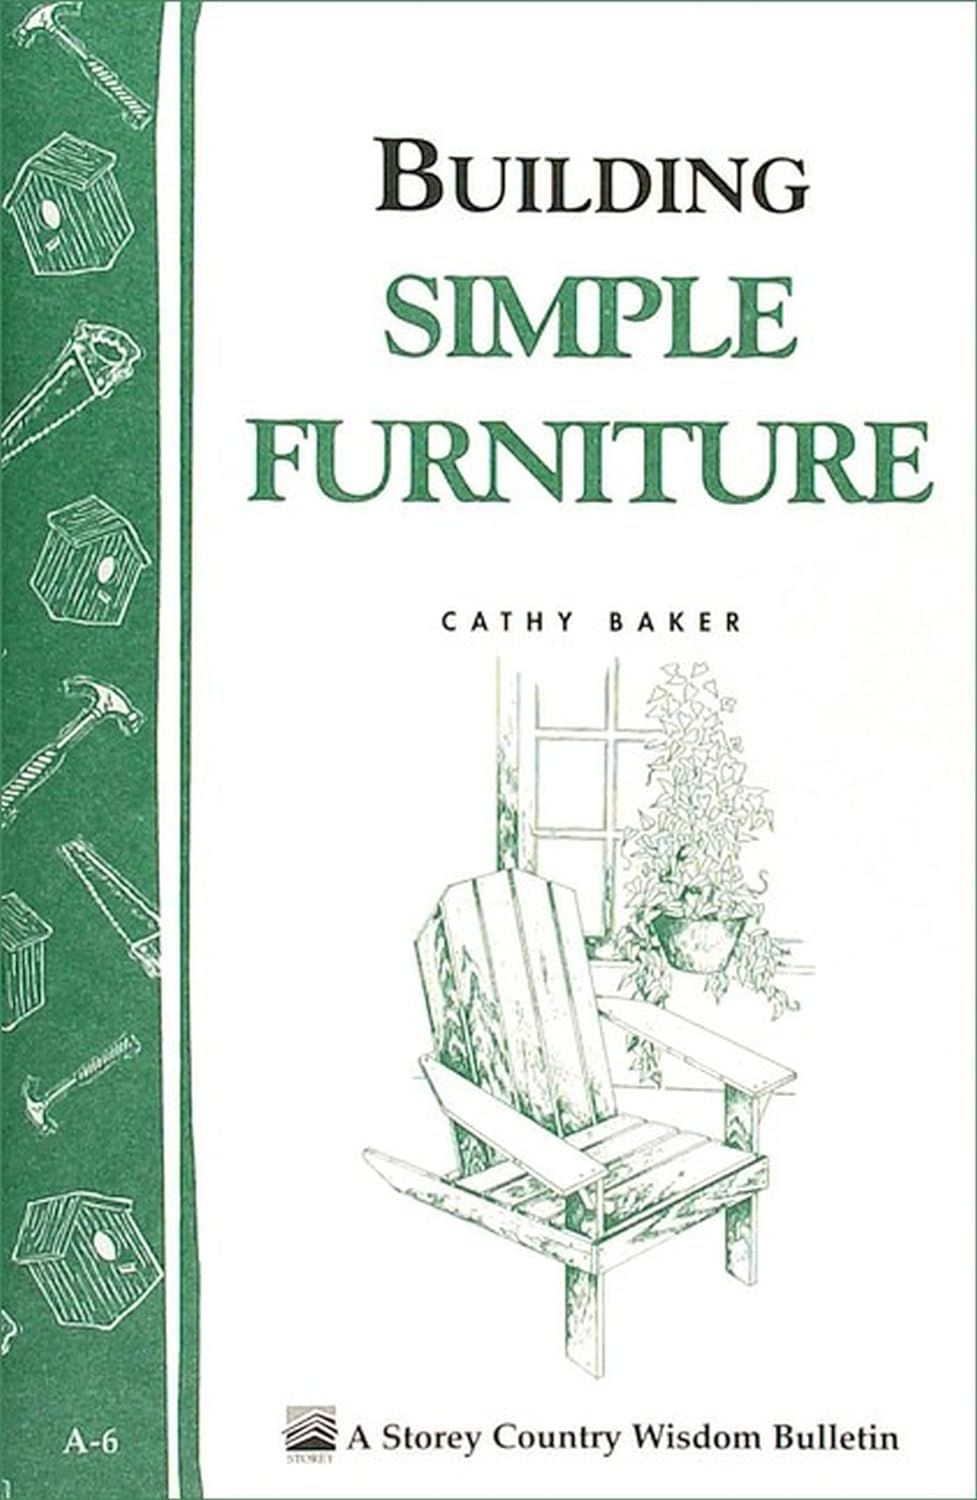 Storey’s Country Wisdom Bulletin: Building Simple Furniture - by Cathy Baker